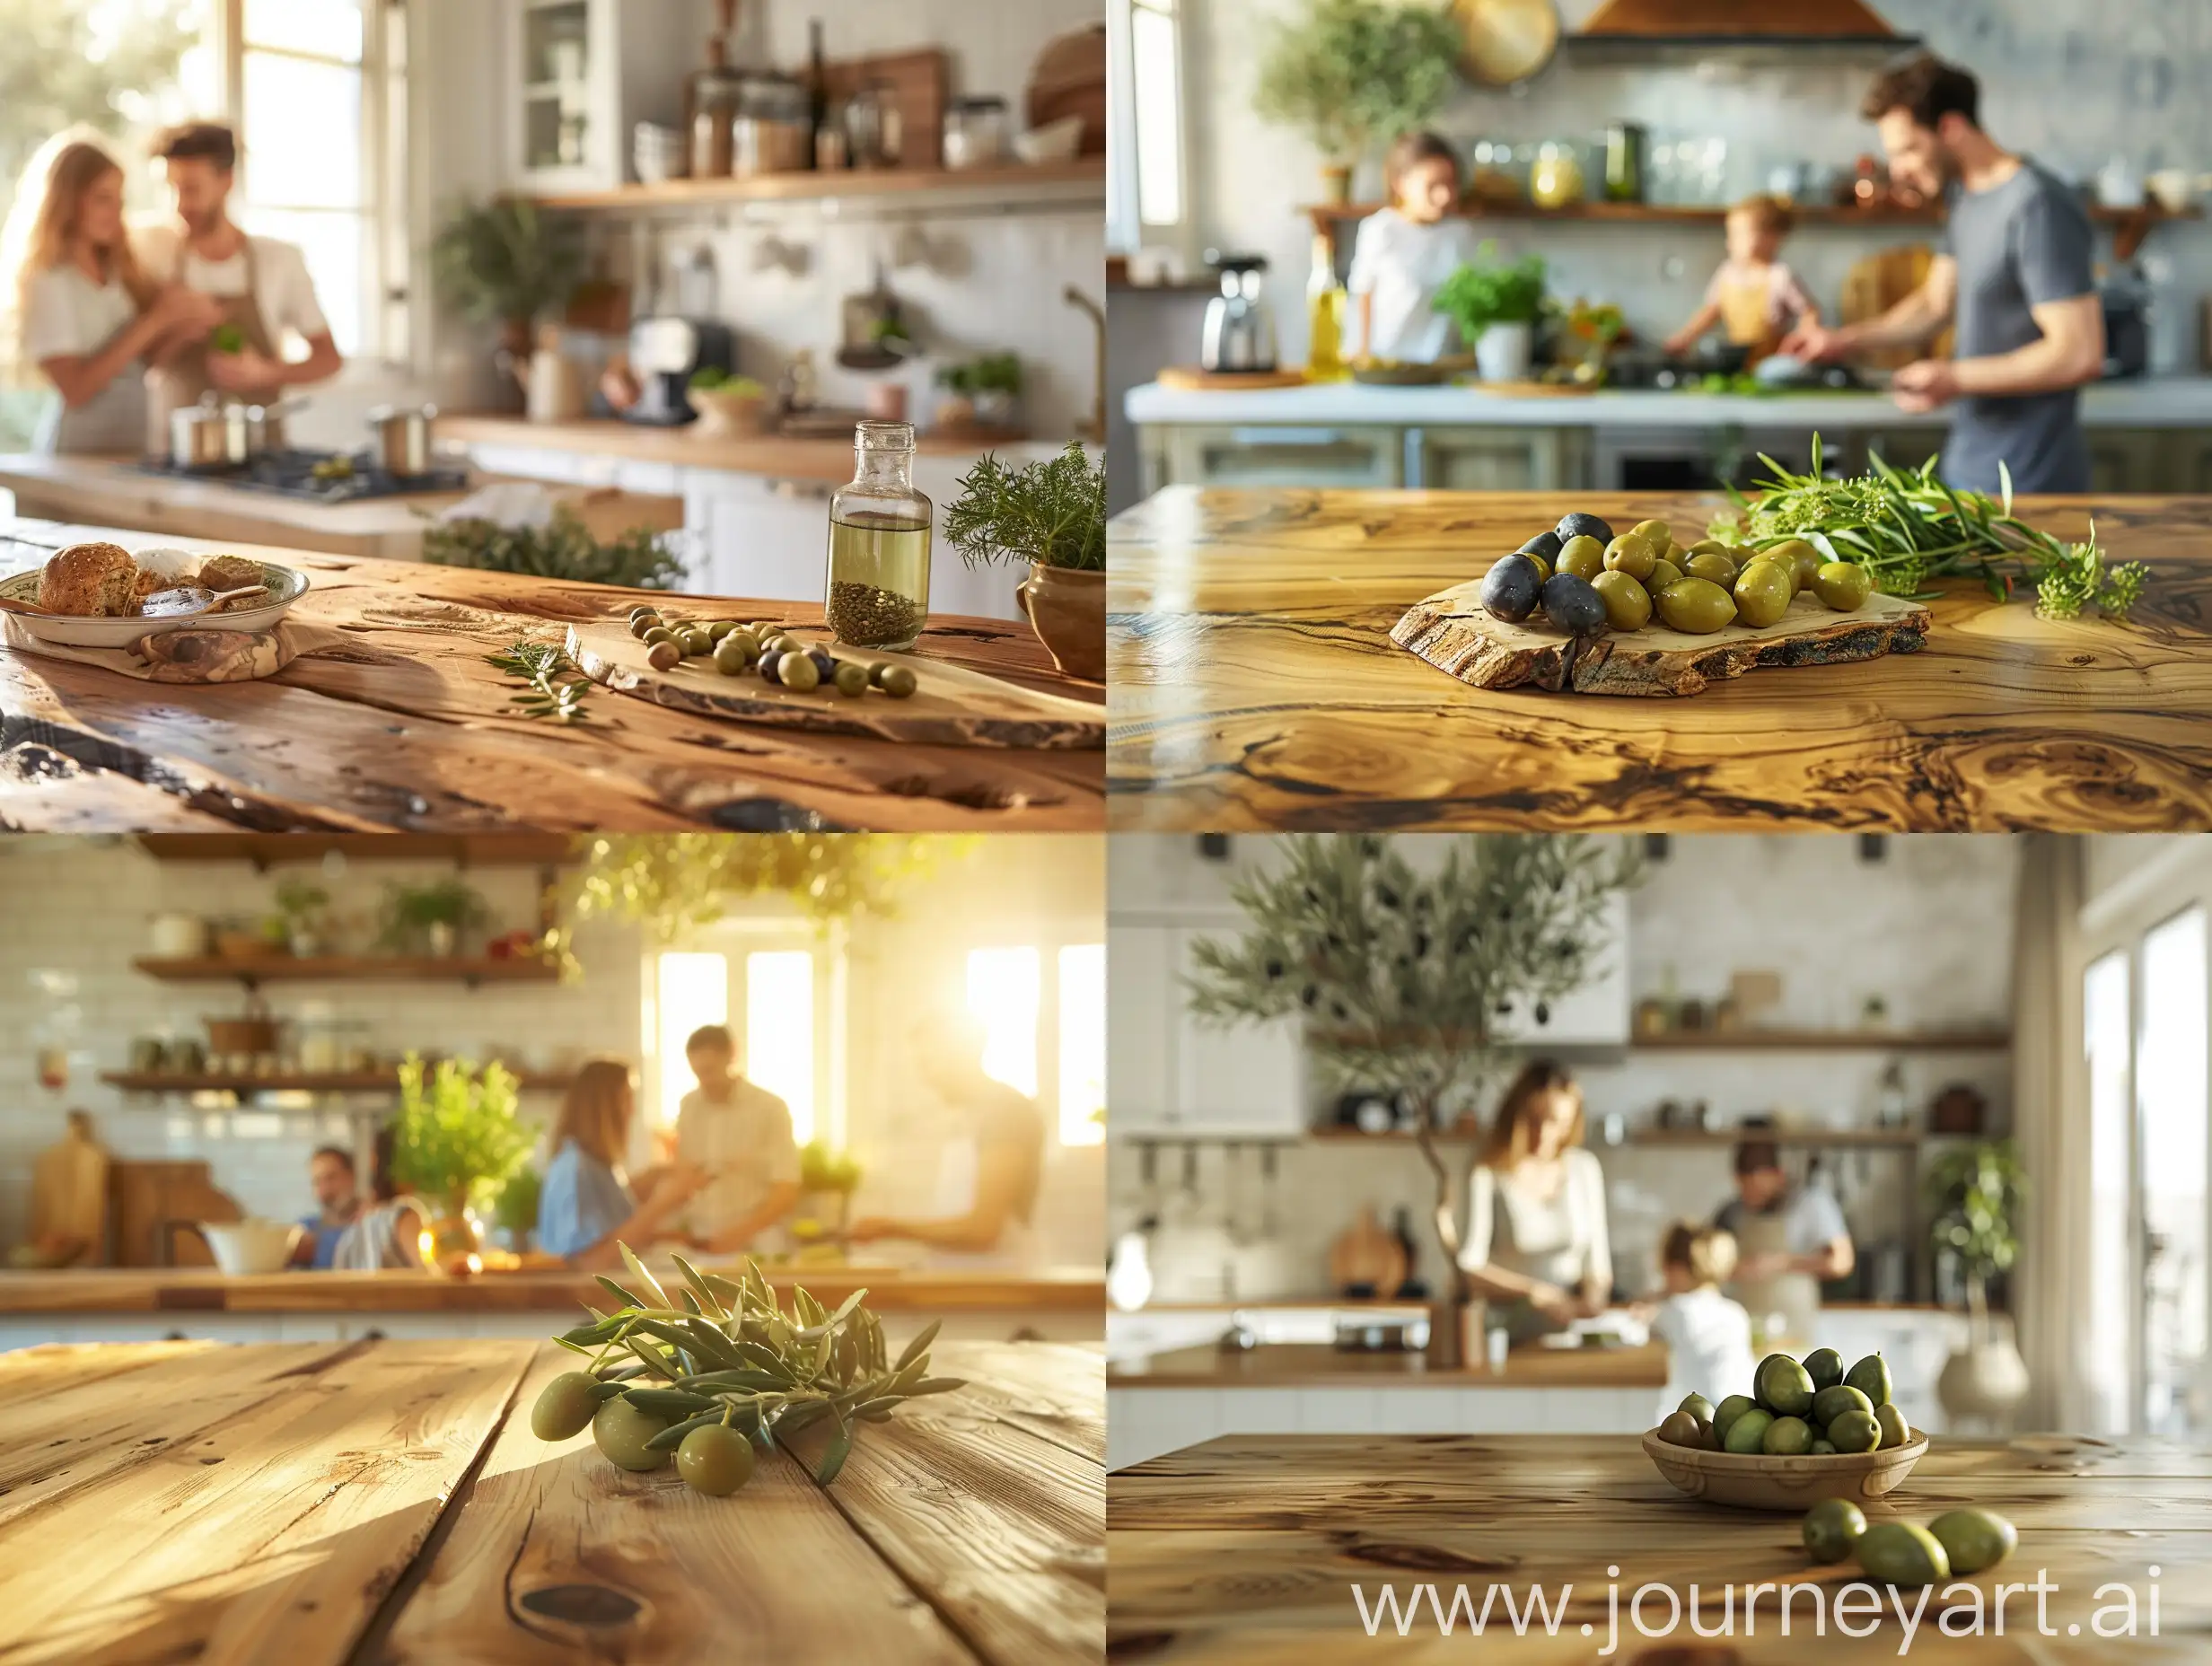 Family-Cooking-Together-in-Stylish-Bright-Kitchen-on-Olive-Wooden-Table